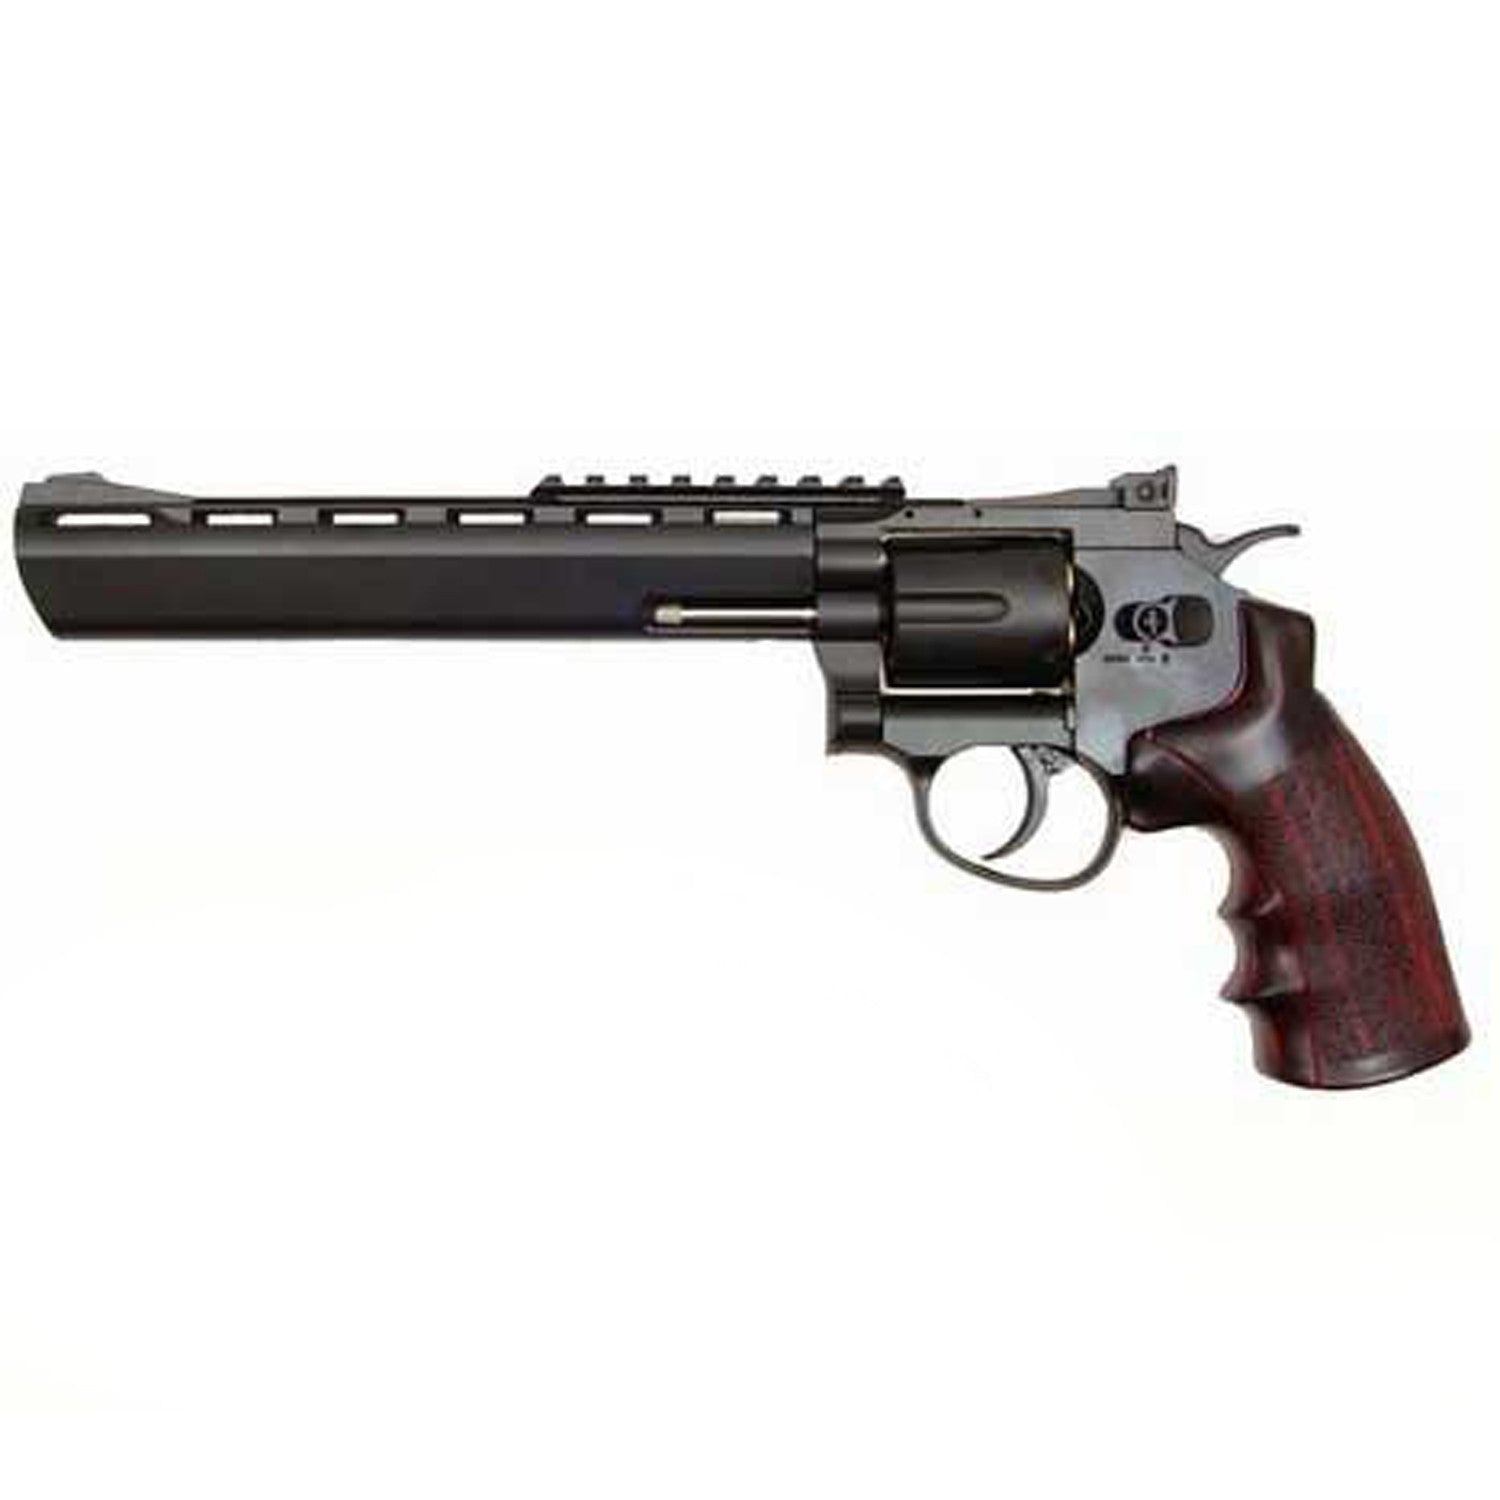 WG 8" Barrel Co2 Revolver -       390-450fps     Full Metal Body     Heavy Weight. 1:1 Scale     Fast Co2 Loading System     12gm Co2 Cartridge Only (Not Included)     6 Replica Shells     One Tactical Rail     Replica Wood Grip